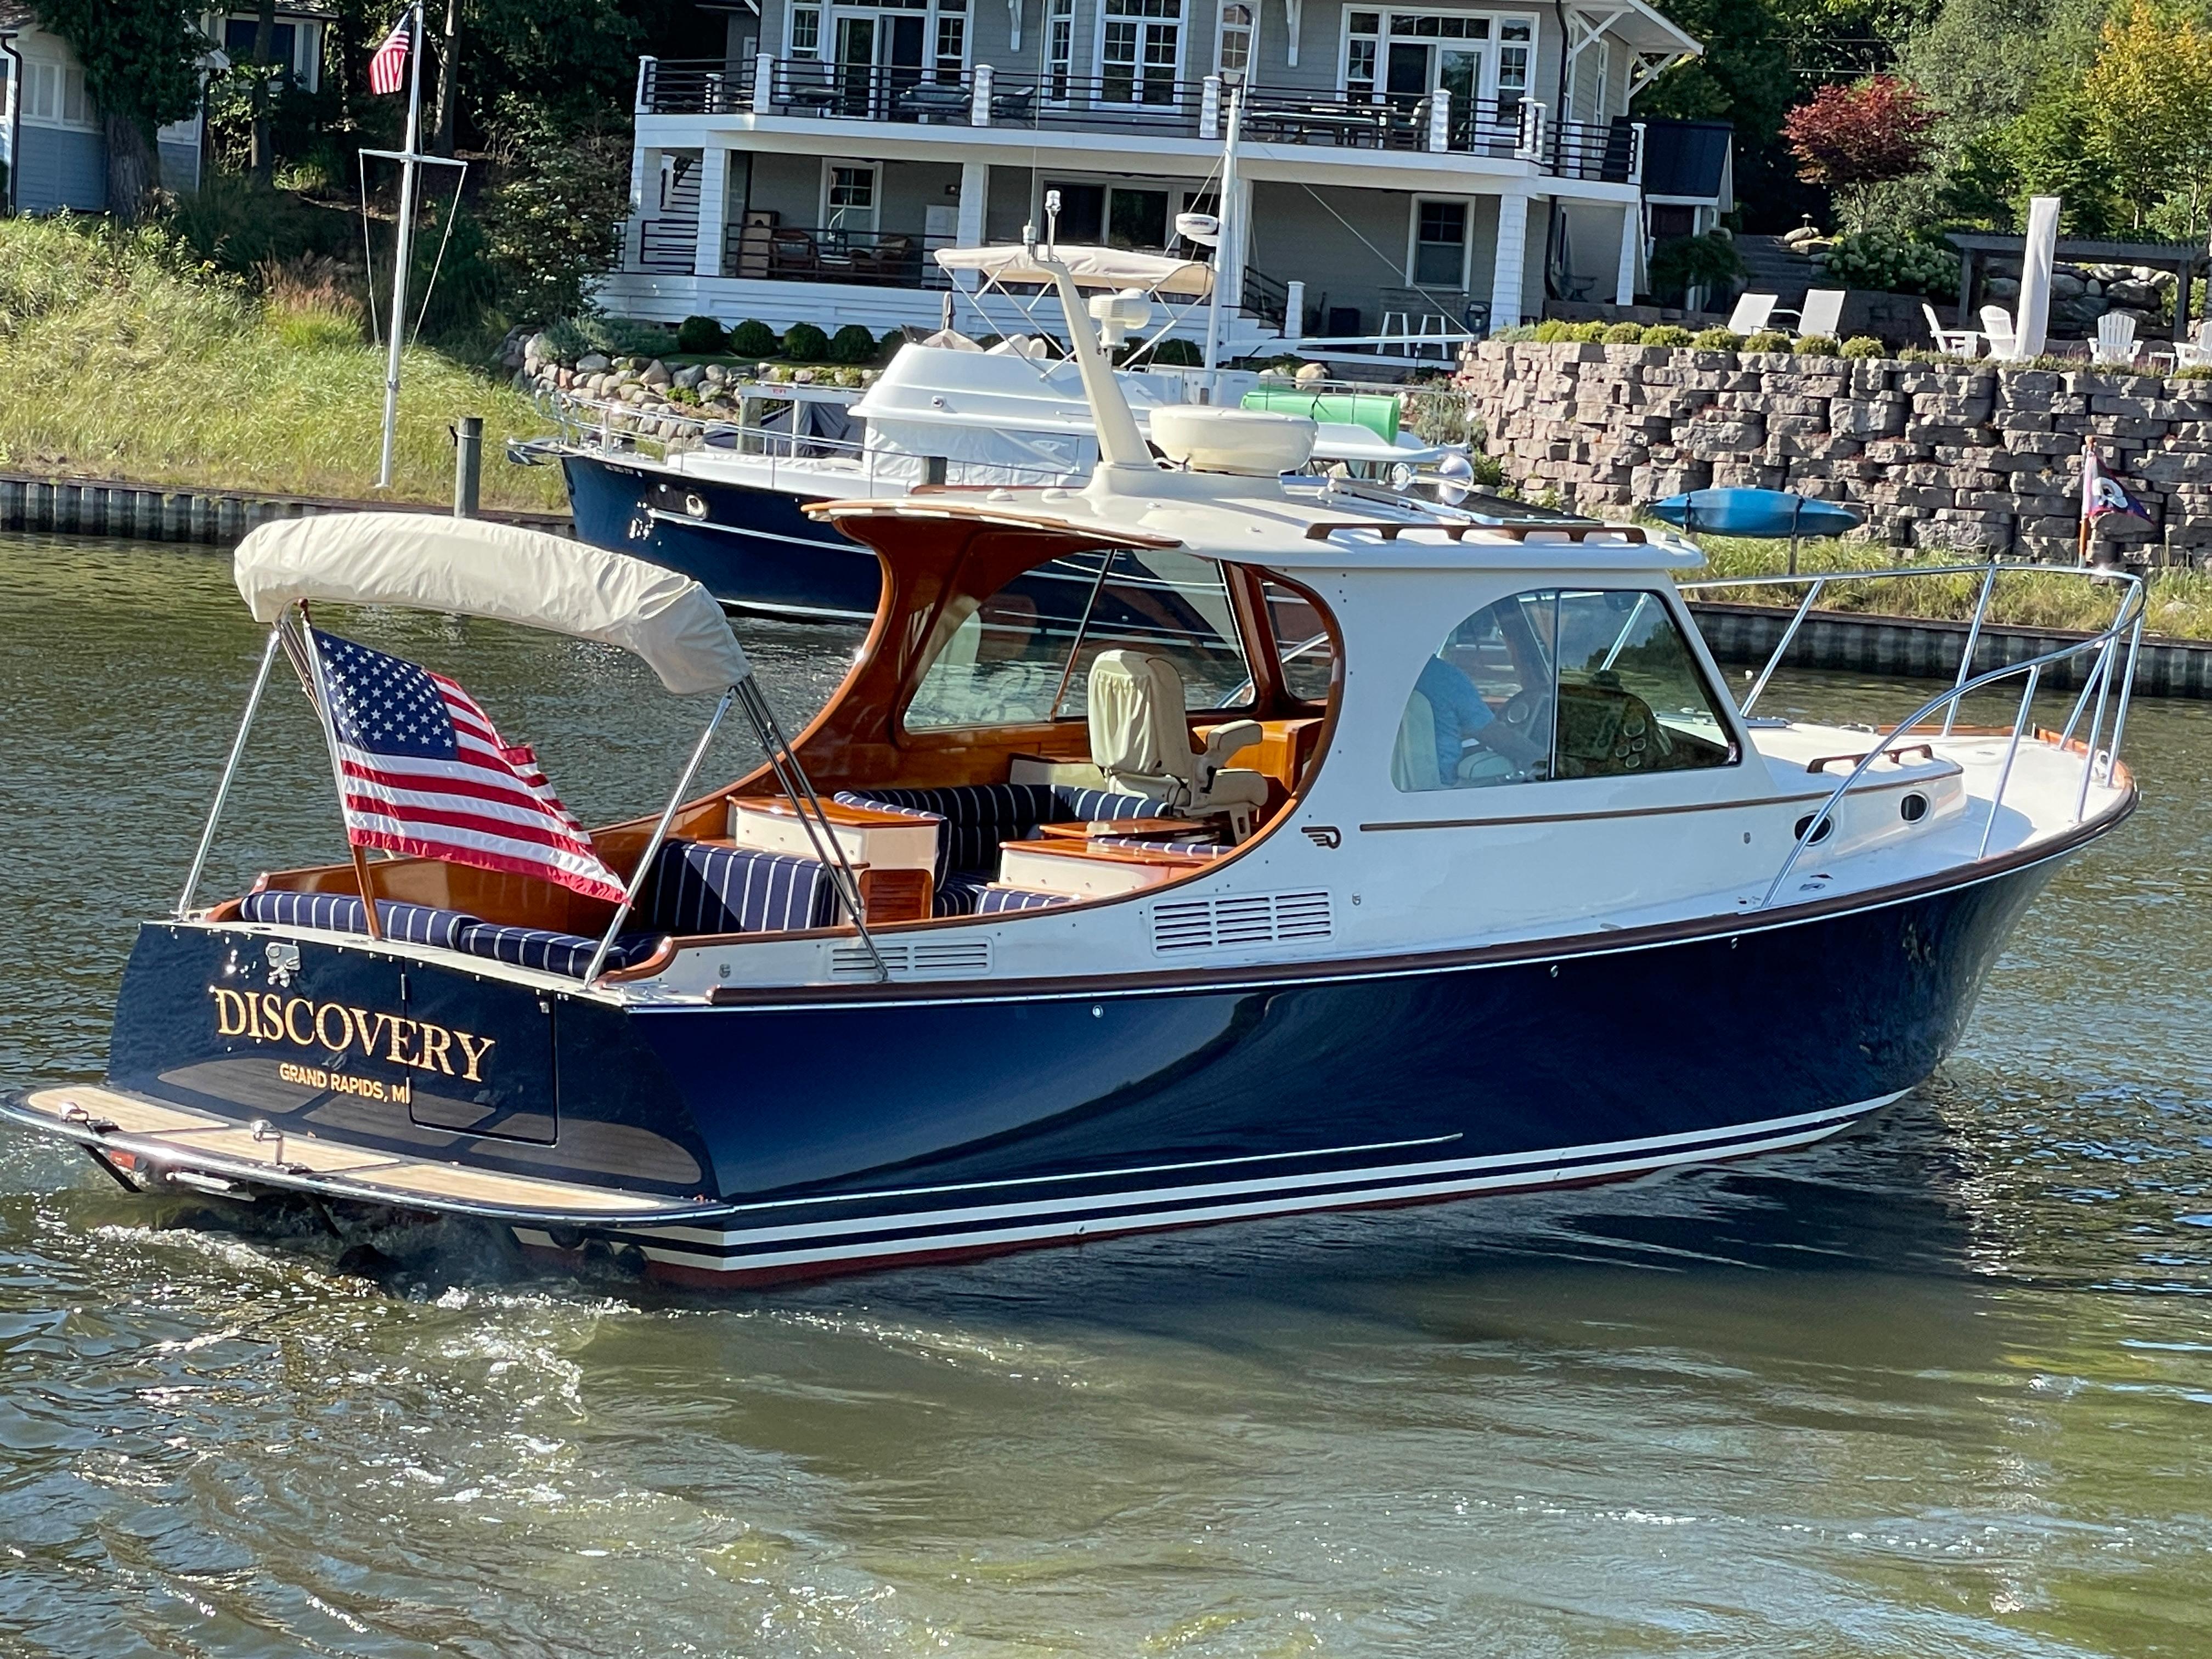 2010 Discovery picnic boat 37 mkiii